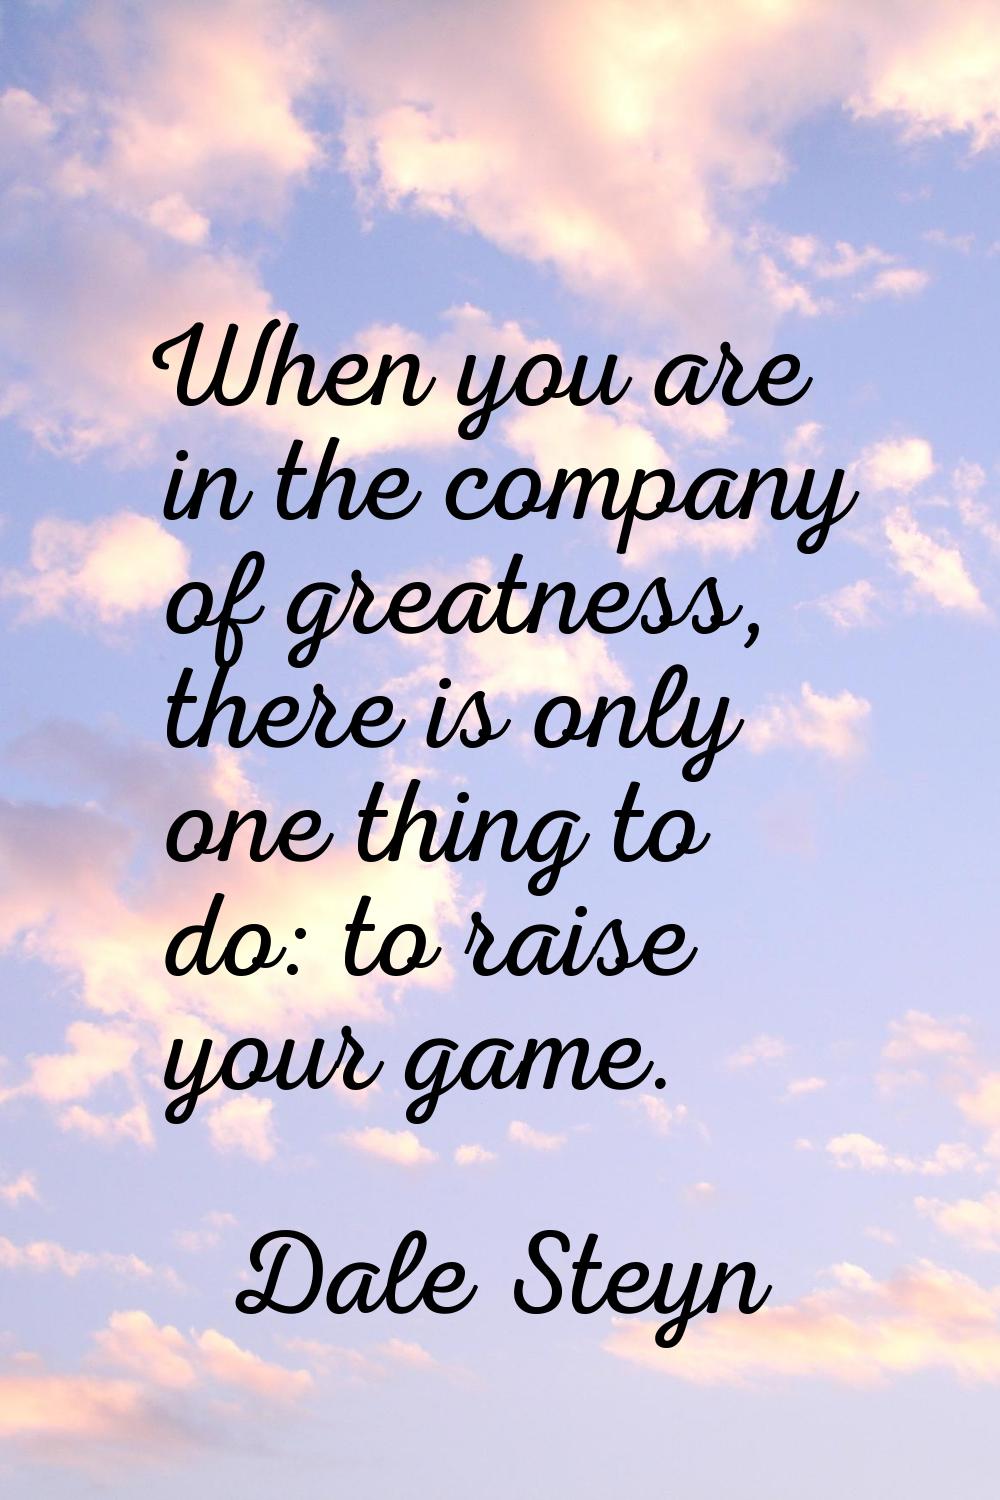 When you are in the company of greatness, there is only one thing to do: to raise your game.